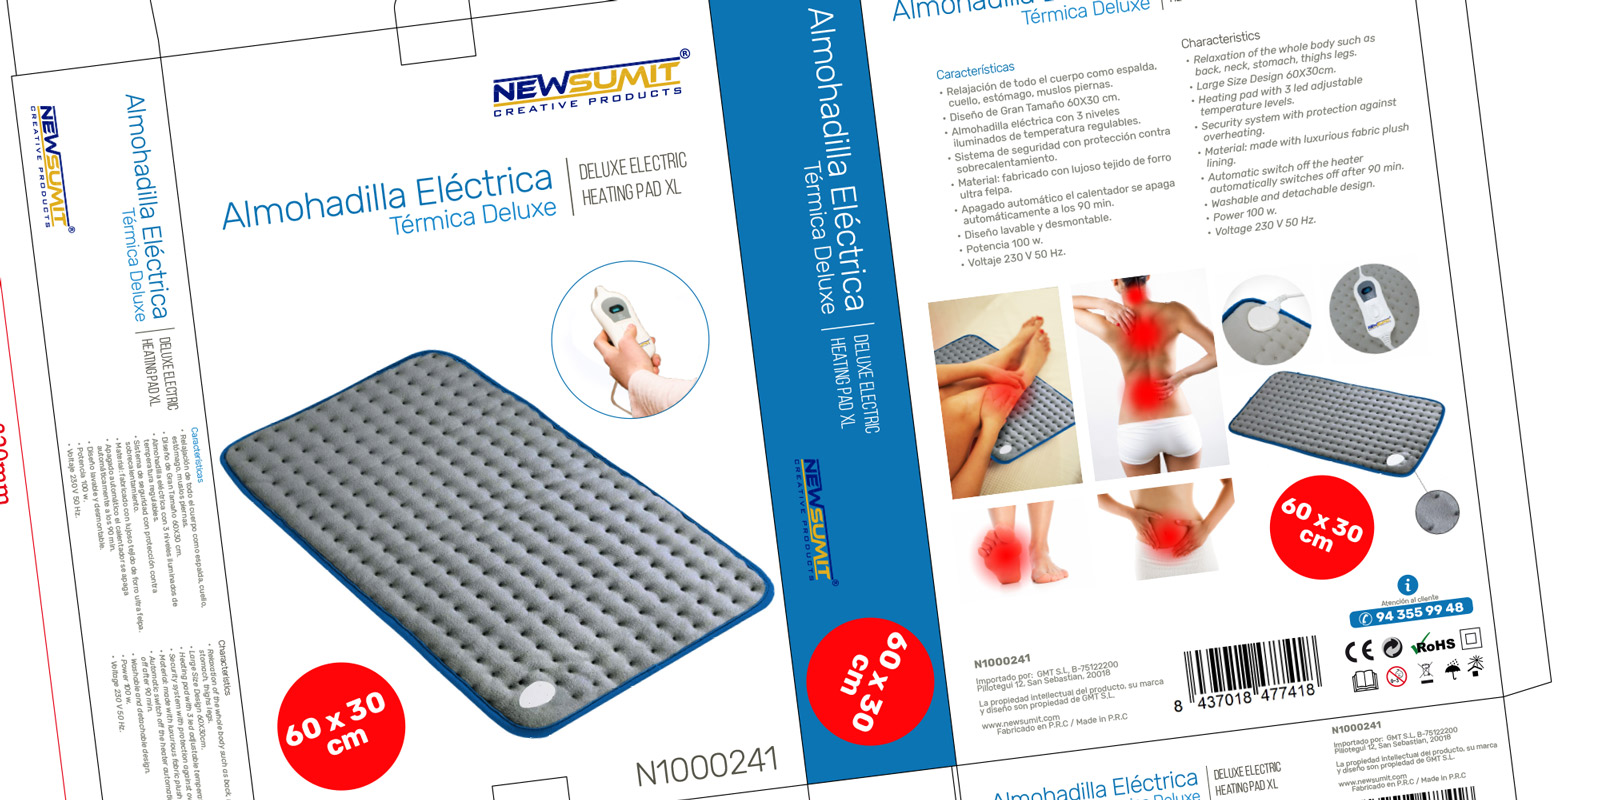 Portfolio of graphic and creative design of label and packaging design for heating pad